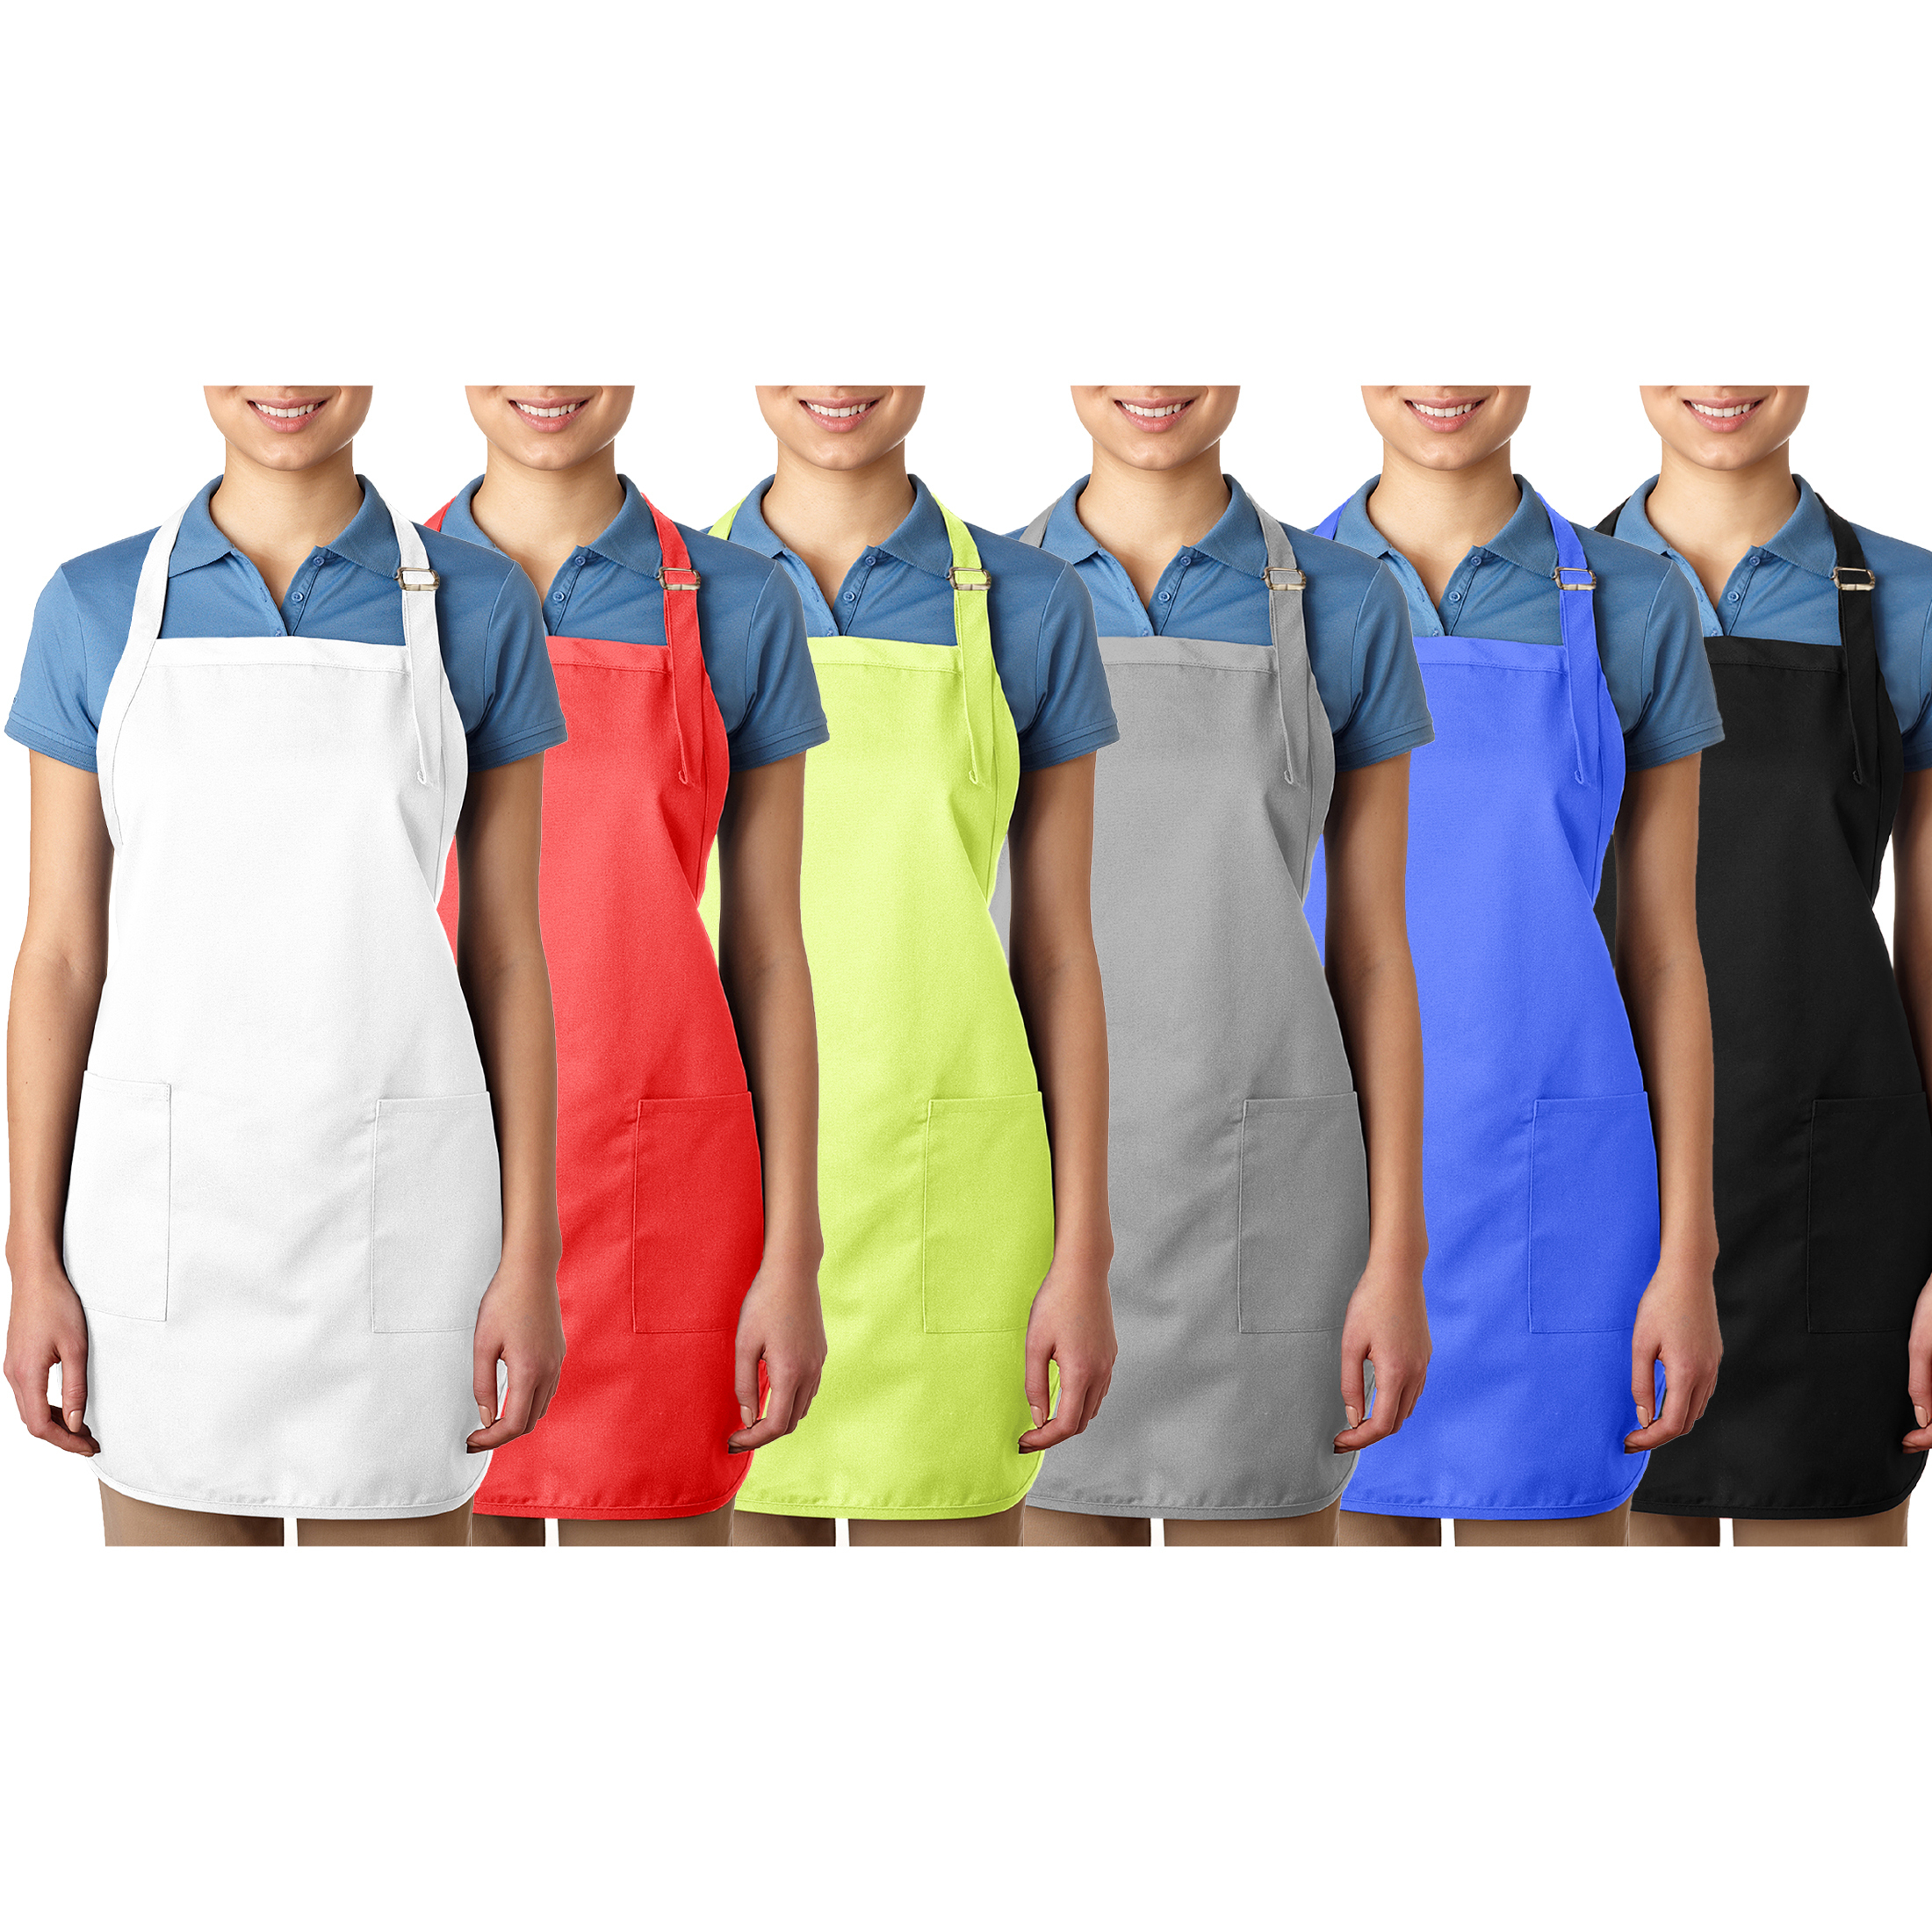 Multi-pack Unisex Deluxe Adjustable Bib Apron With Pockets - 2-Pack